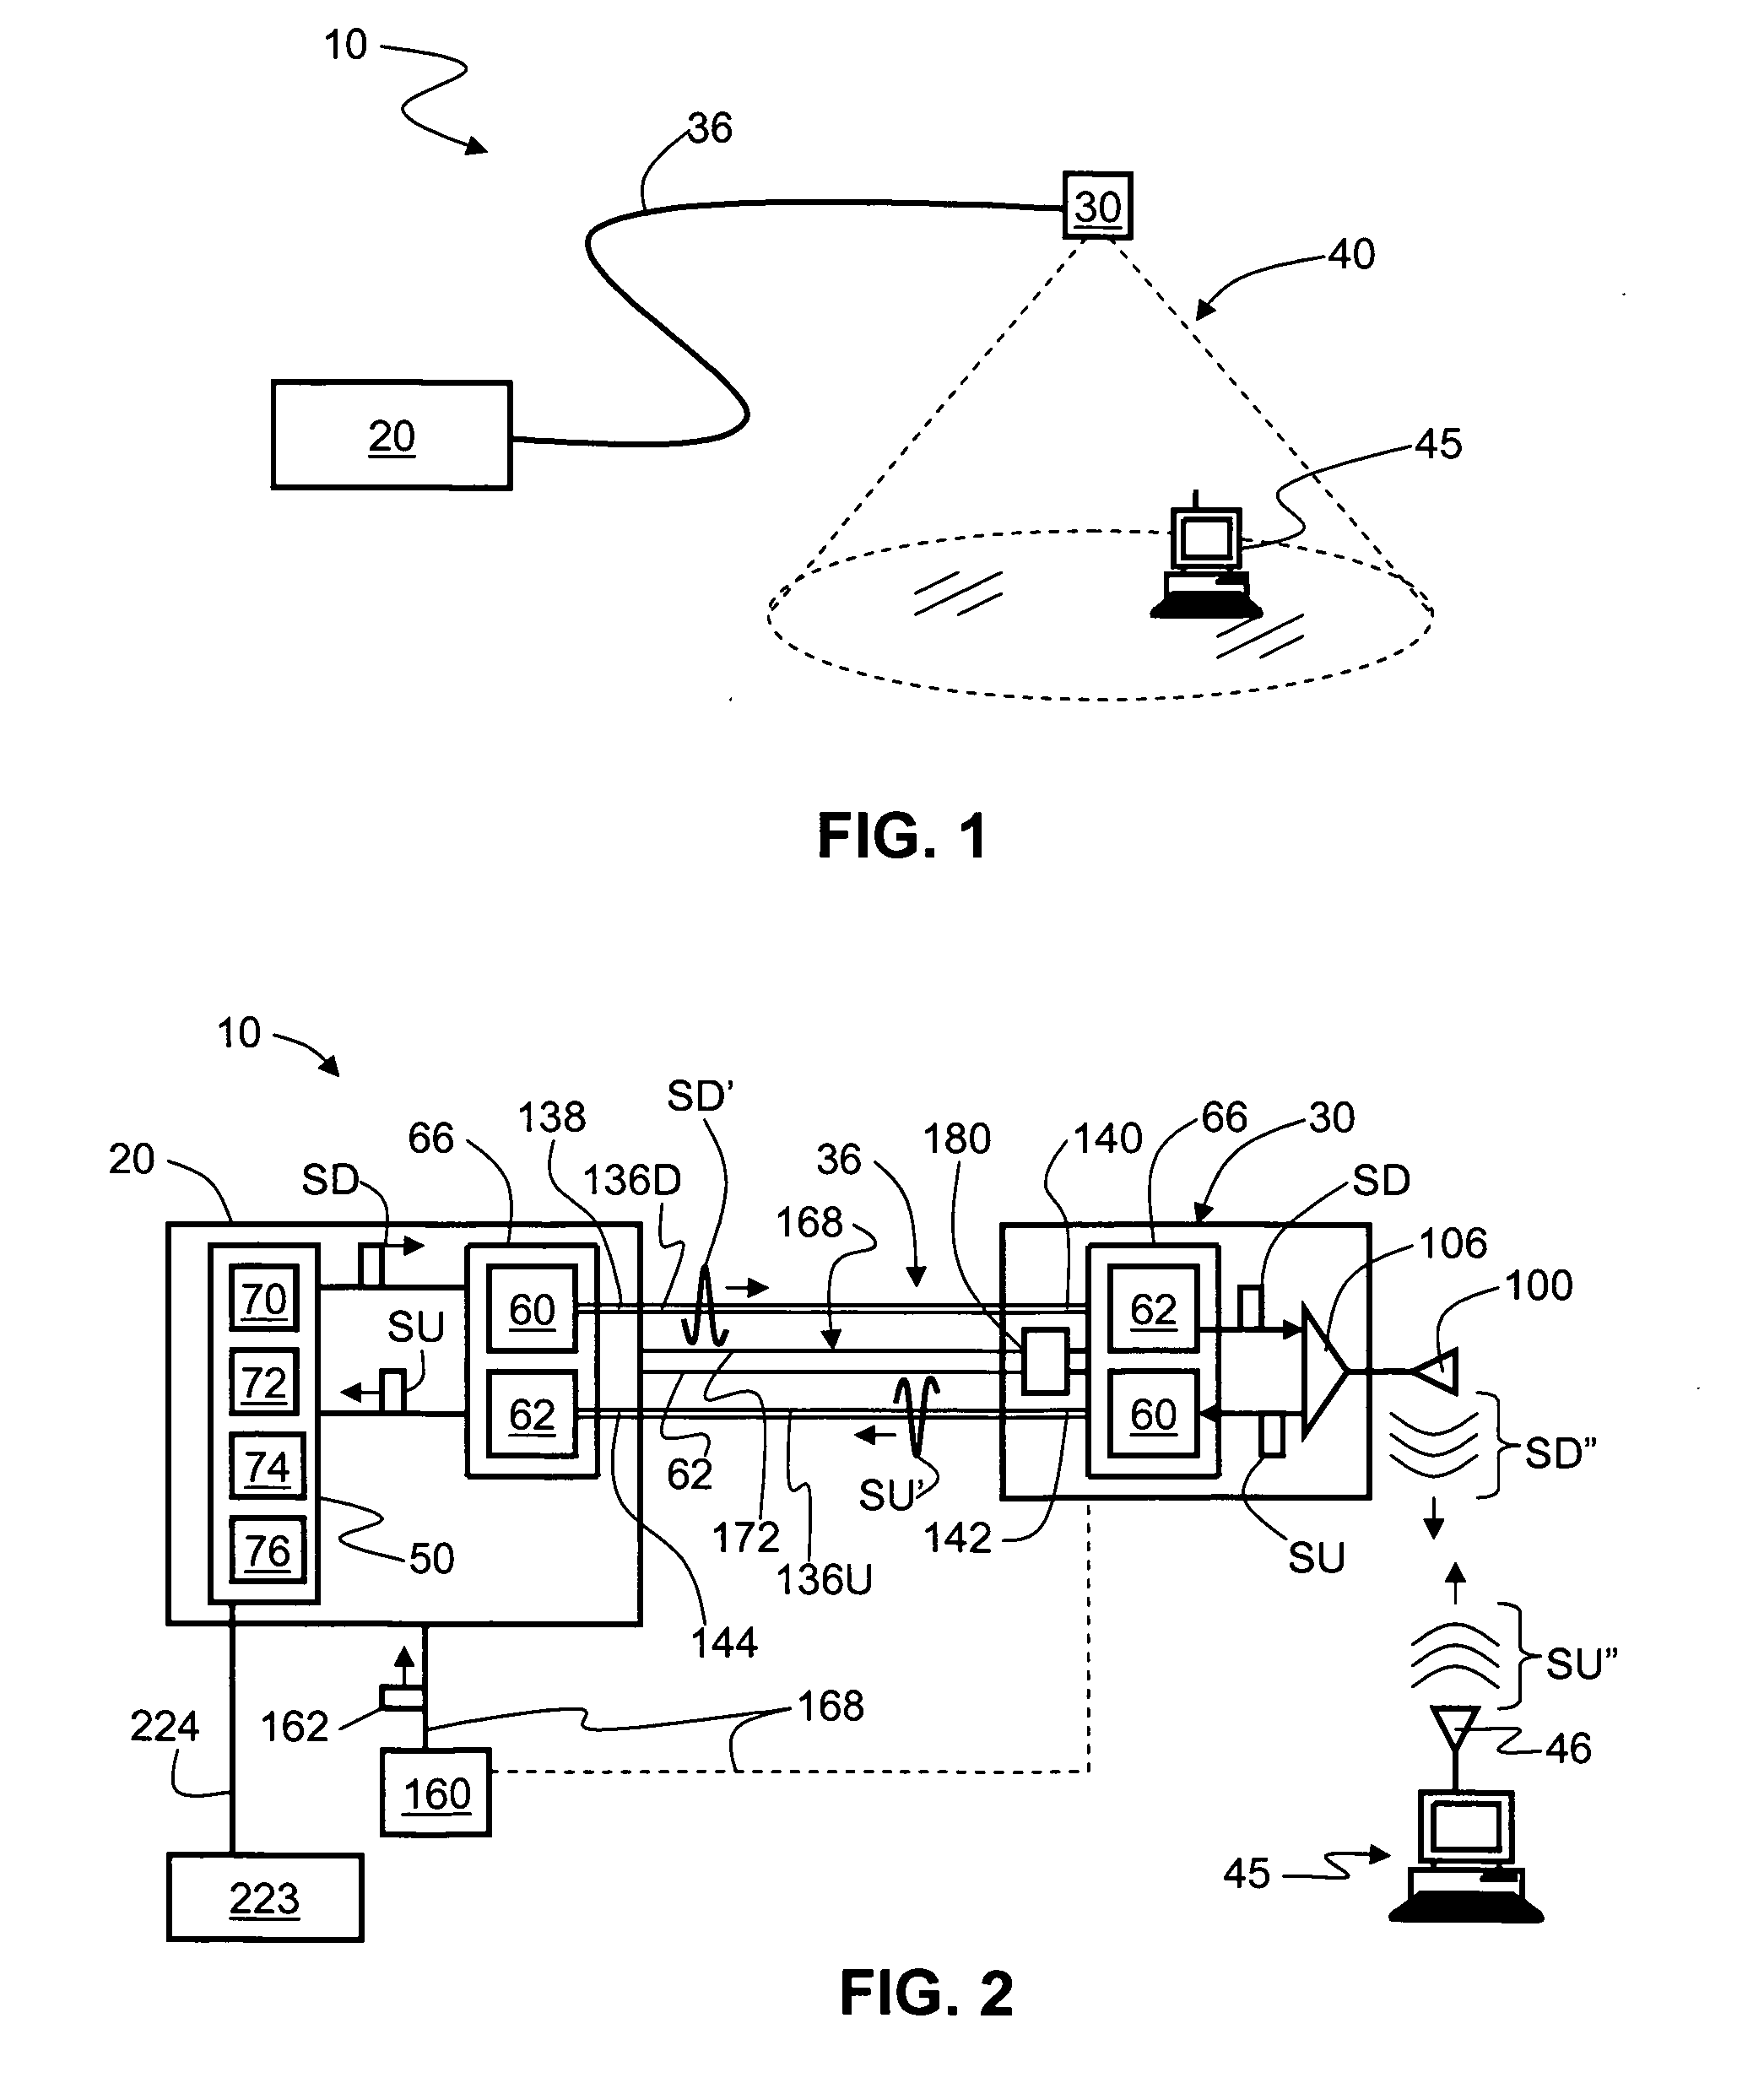 Centralized optical-fiber-based wireless picocellular systems and methods